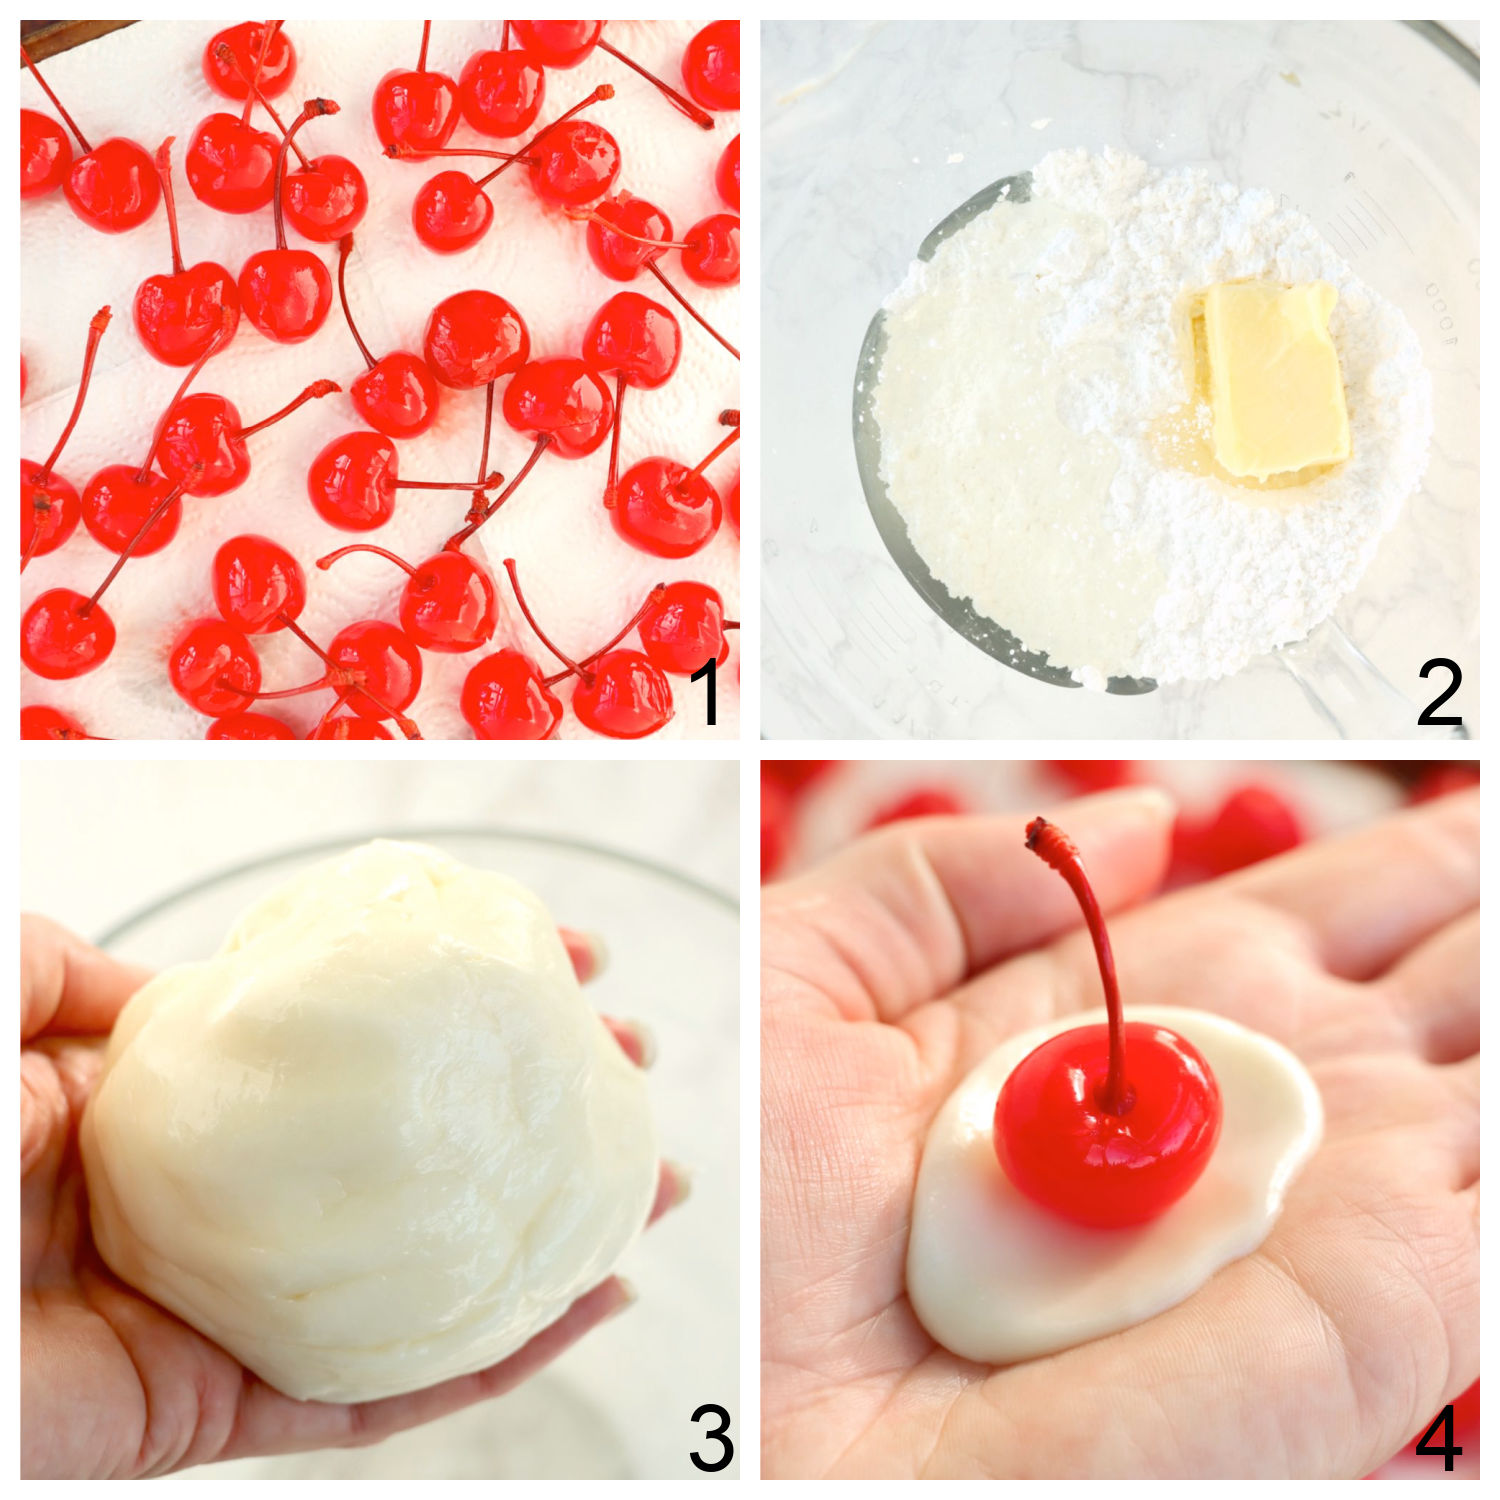 steps for wrapping cherries in fondant